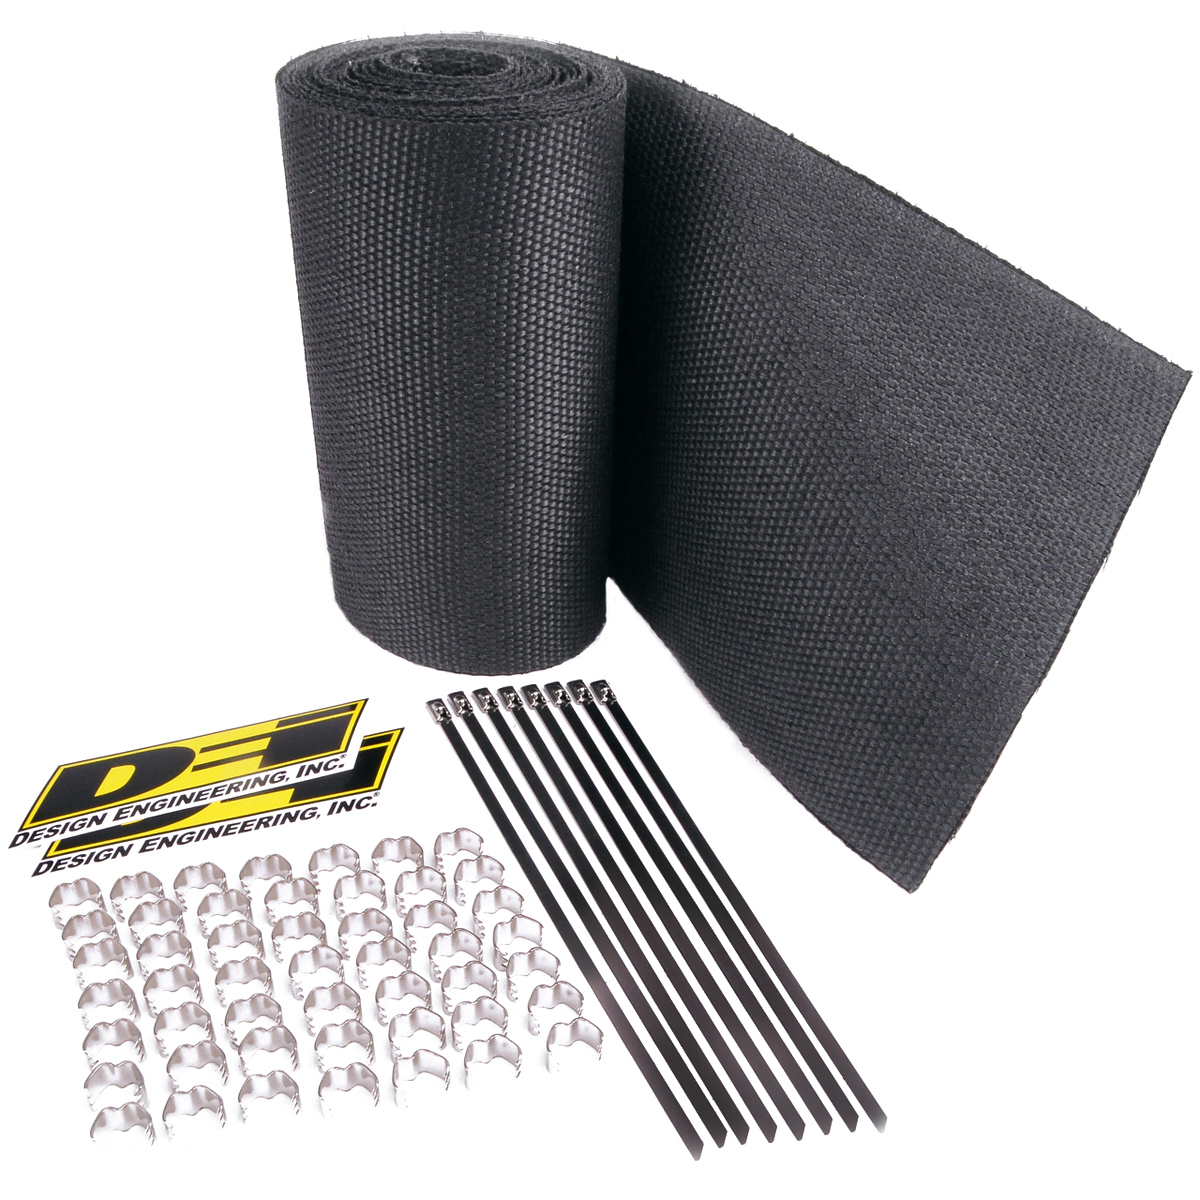 Design Engineering 10084 Exhaust Wrap, Speed Sleeves, 8 in Wide, 12 ft Roll, Chrome Clips / Locking Ties Included, Woven Fiberglass, Black, Pair